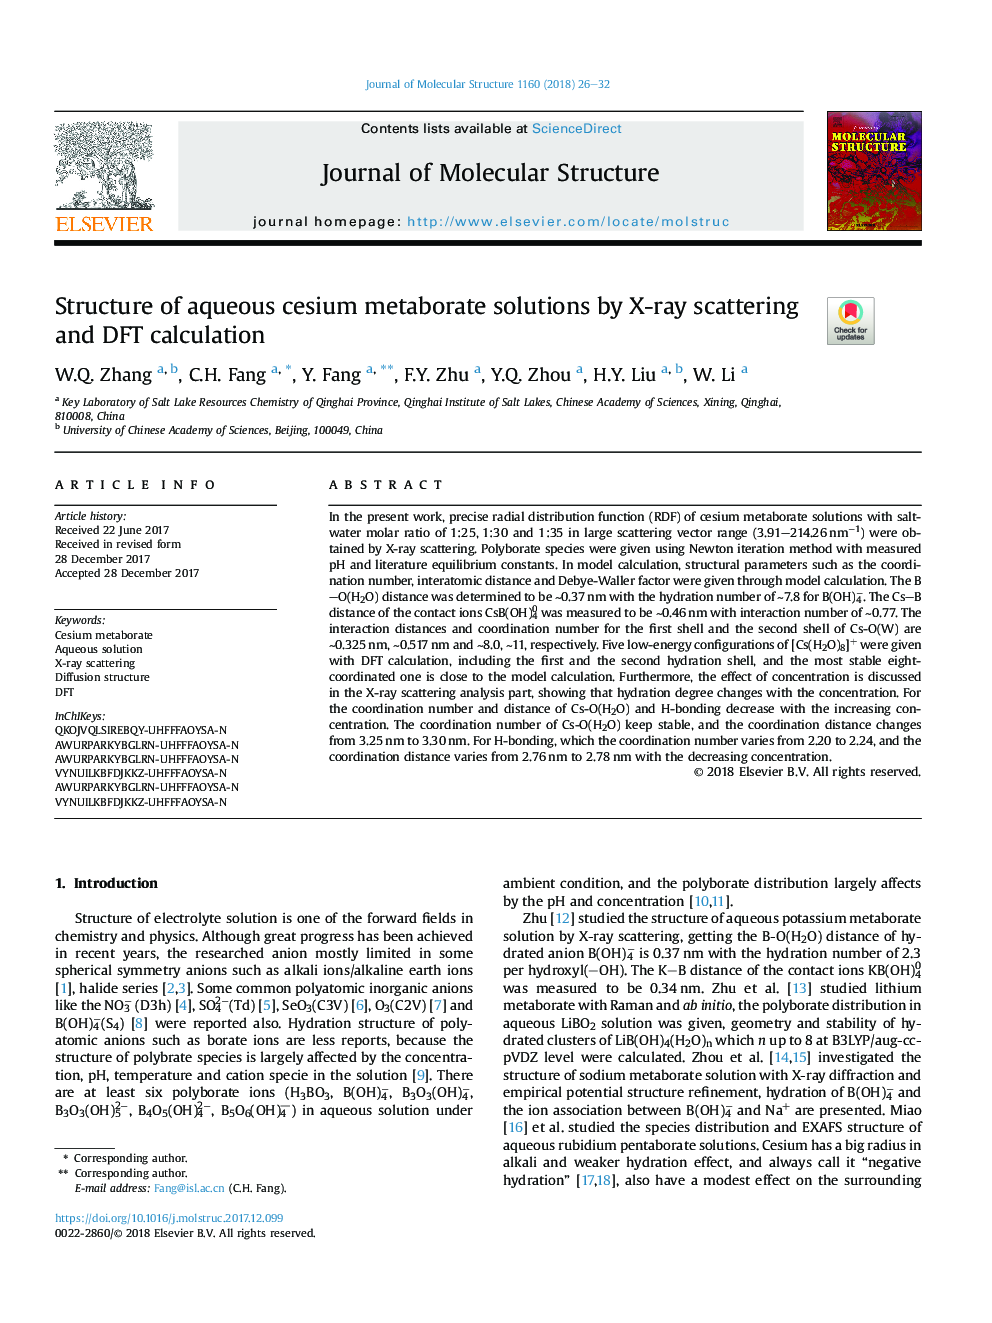 Structure of aqueous cesium metaborate solutions by X-ray scattering and DFT calculation